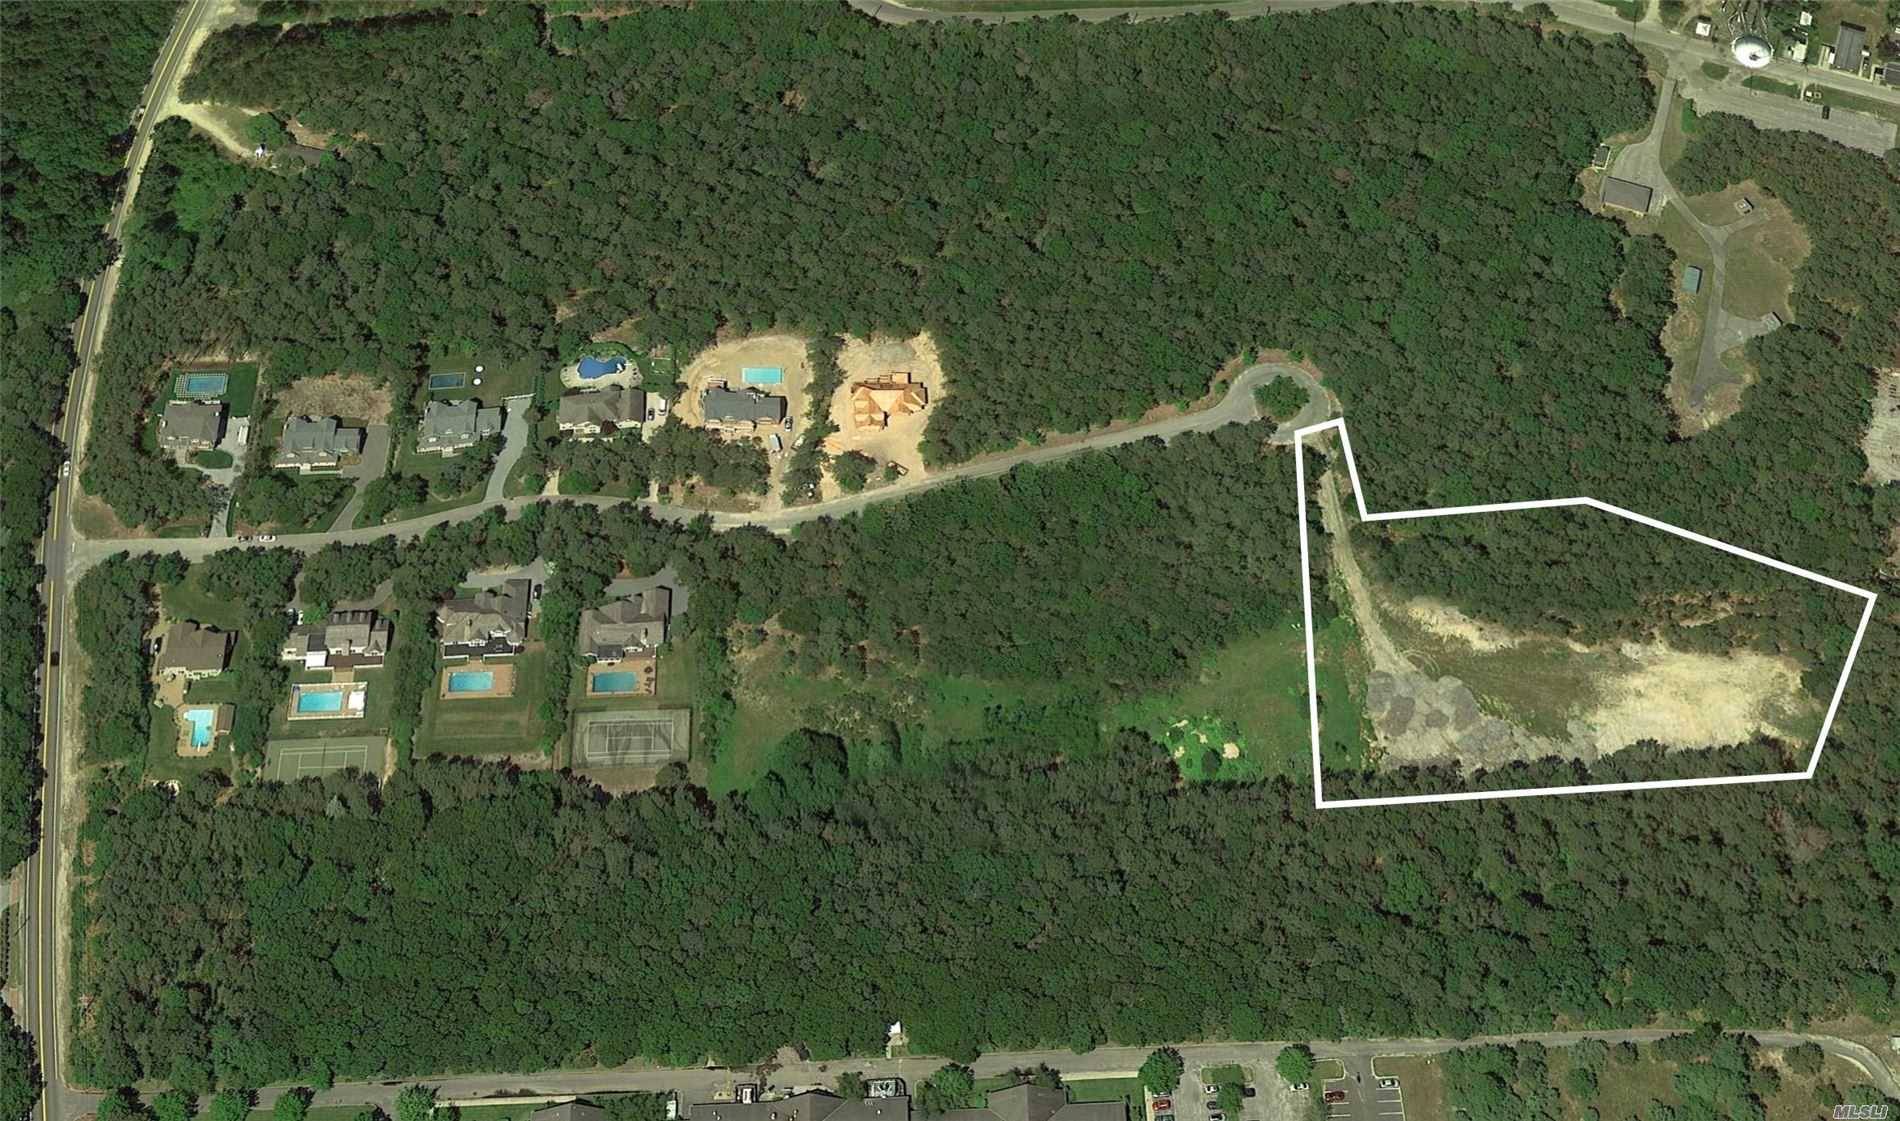 Westhampton 3. 24 acre prime and beautiful building lot in the final stages of receiving Southampton Town approval for subdivision into 3 residential lots, with those improvements required for subdivision ...